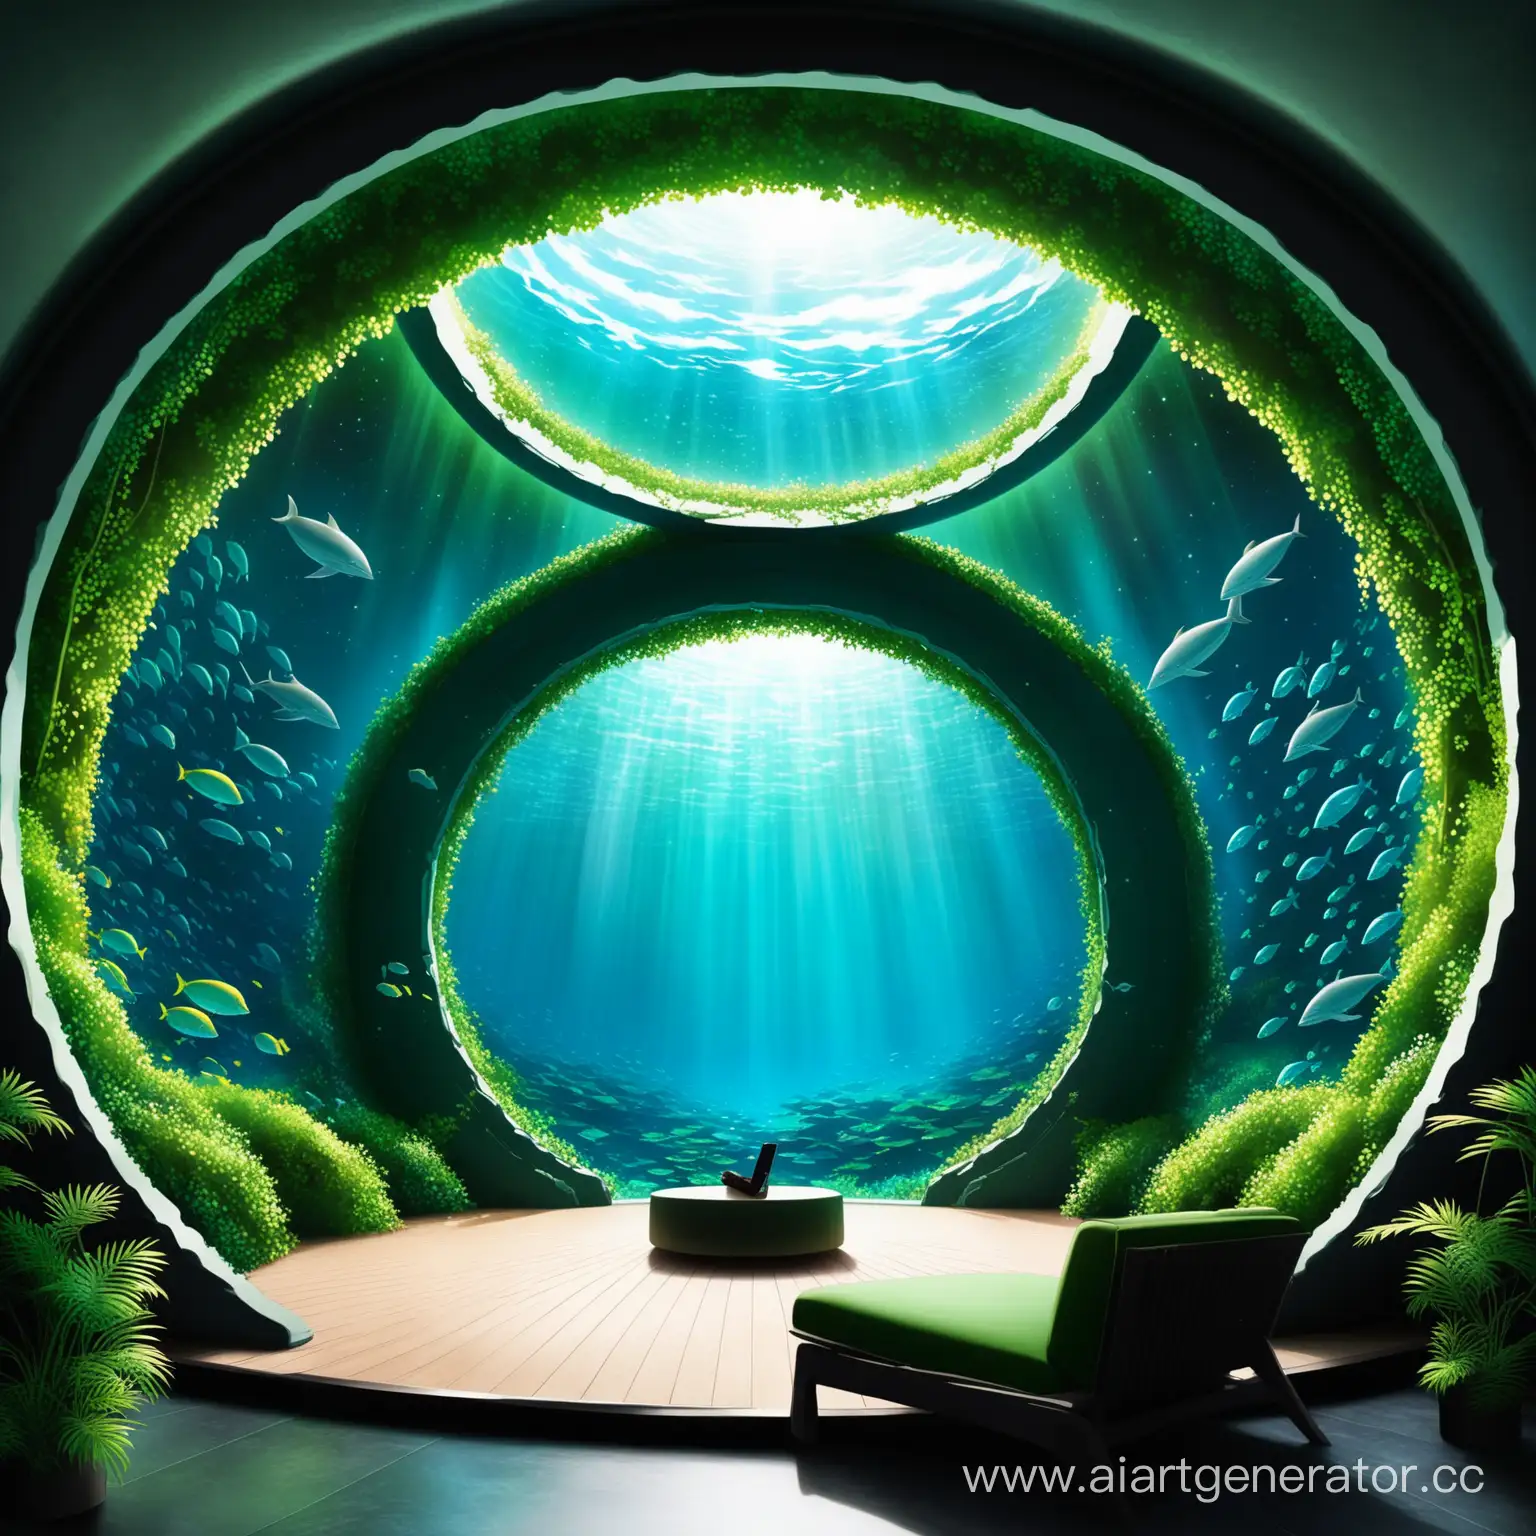 livingroom design deeps of oceans black and blue and green
 without  fish 
mythological architecth 
a new universe
jules verne
eco friendly arch
without television 
